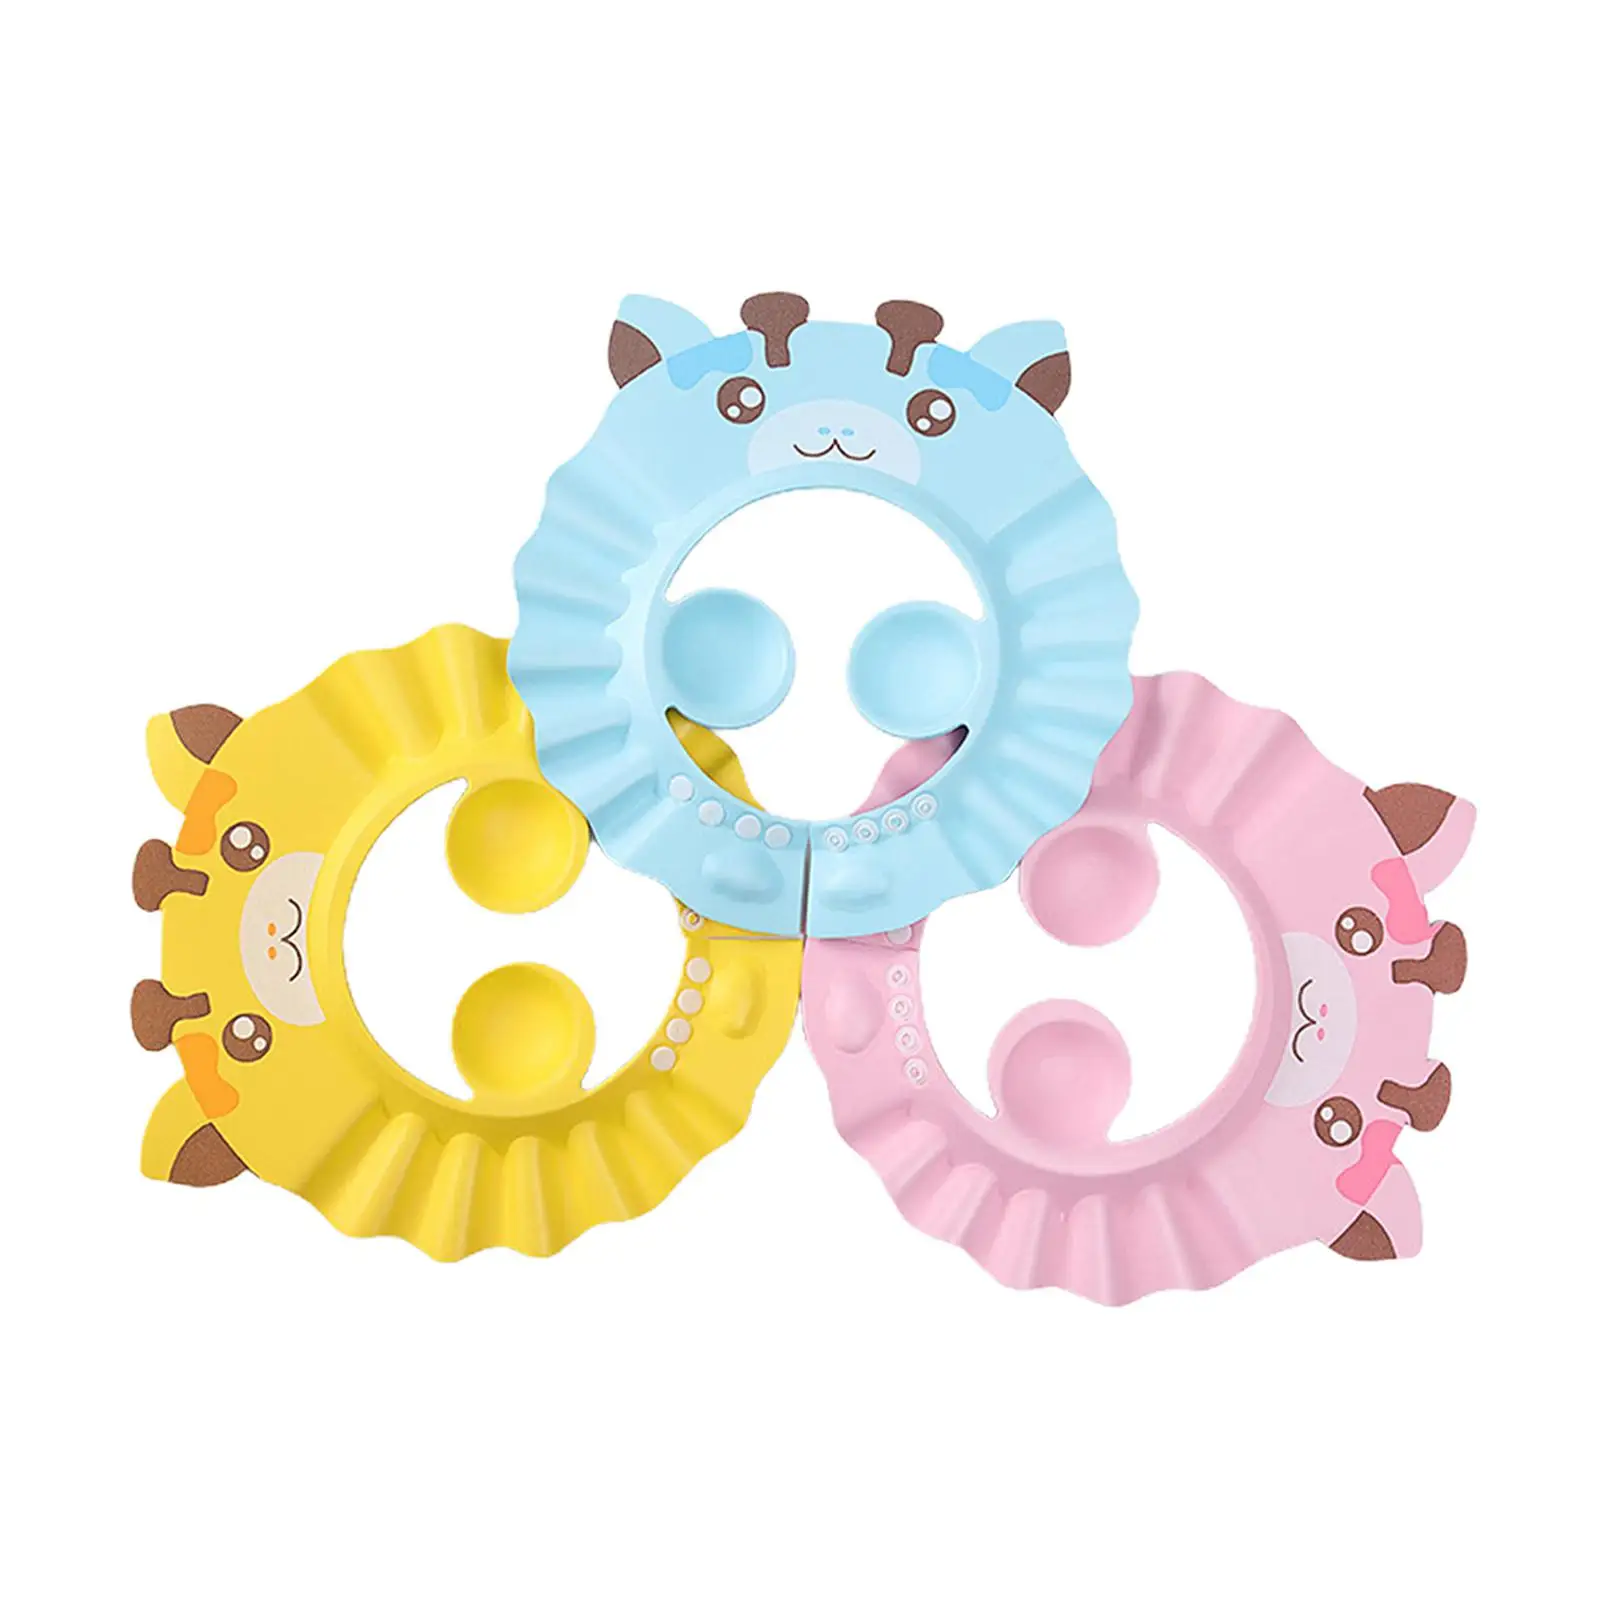 3x Adjustable Baby Bathing Caps for Babies Waterproof Shampoo for